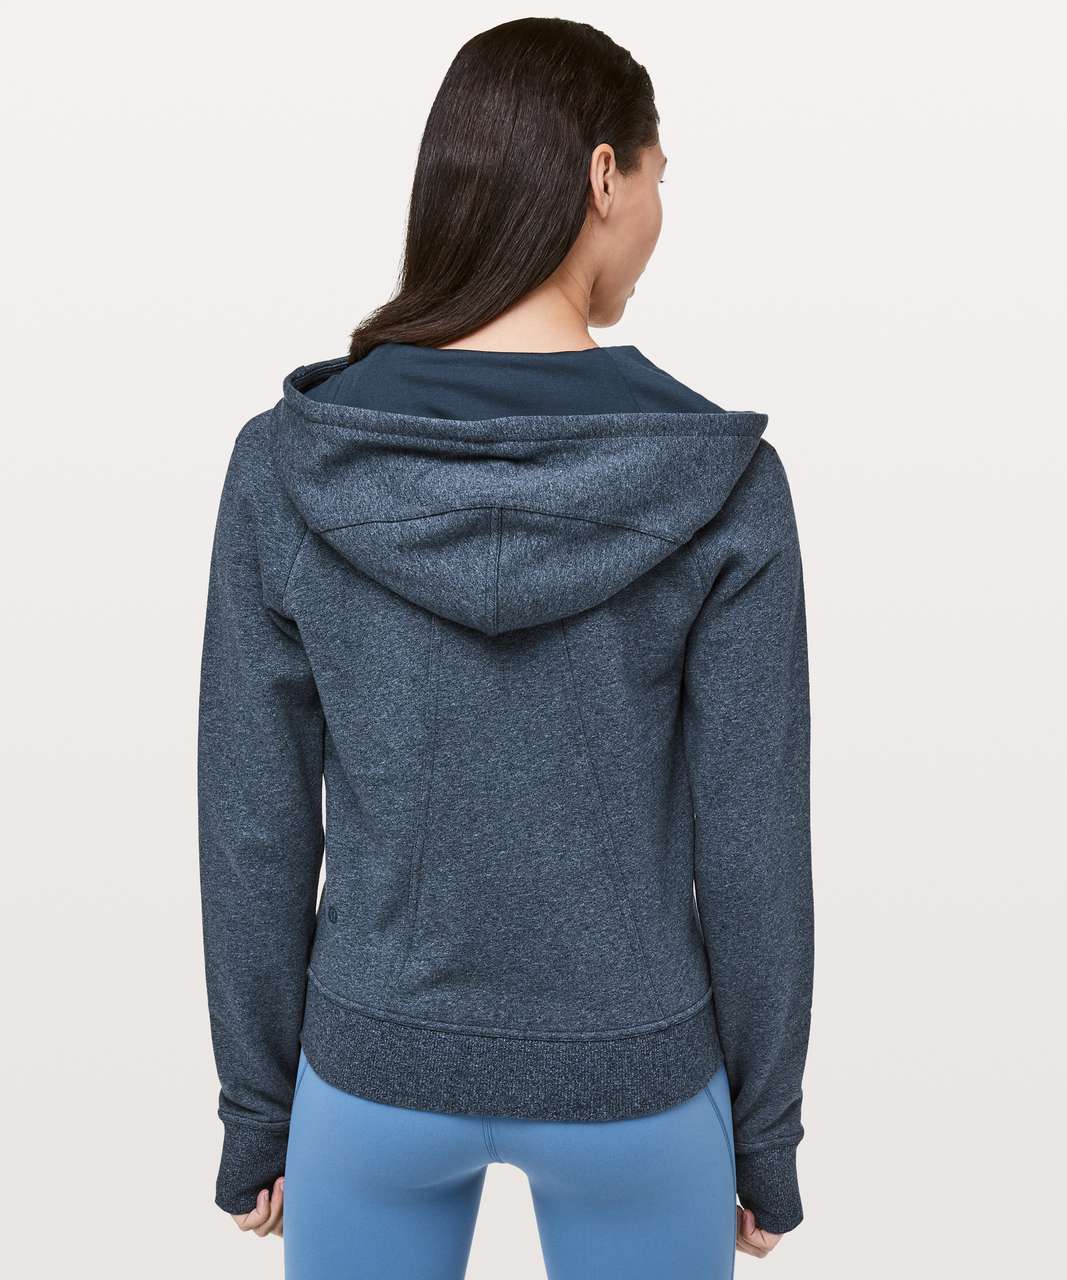 Lululemon Time Out Hoodie Heathered Blue Front Pocket Women's Size: 4